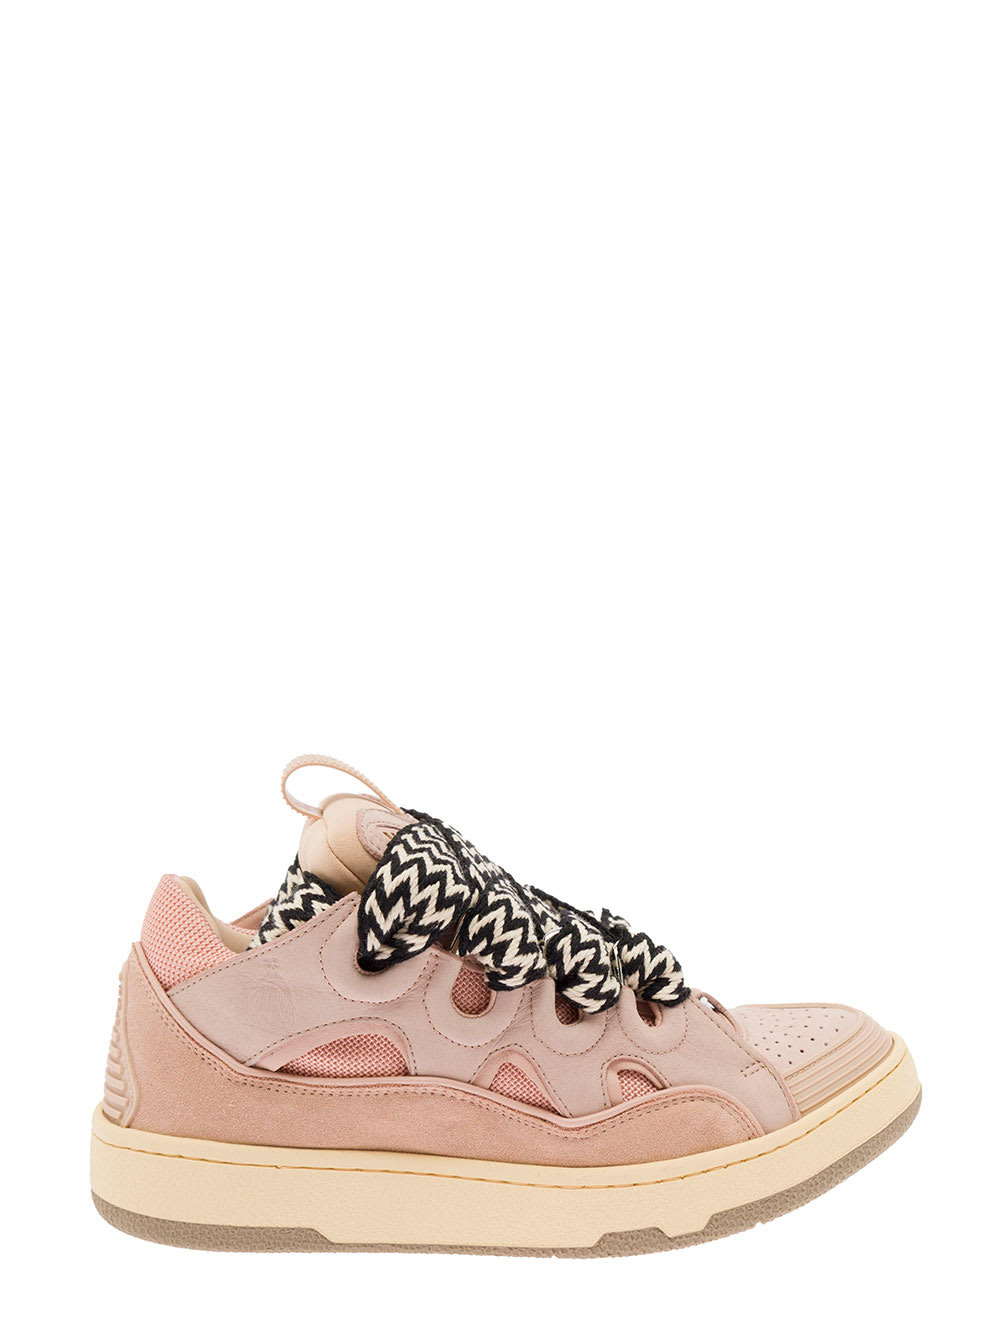 Curb pink leather sneakers with multicolor laces Lanvin woman